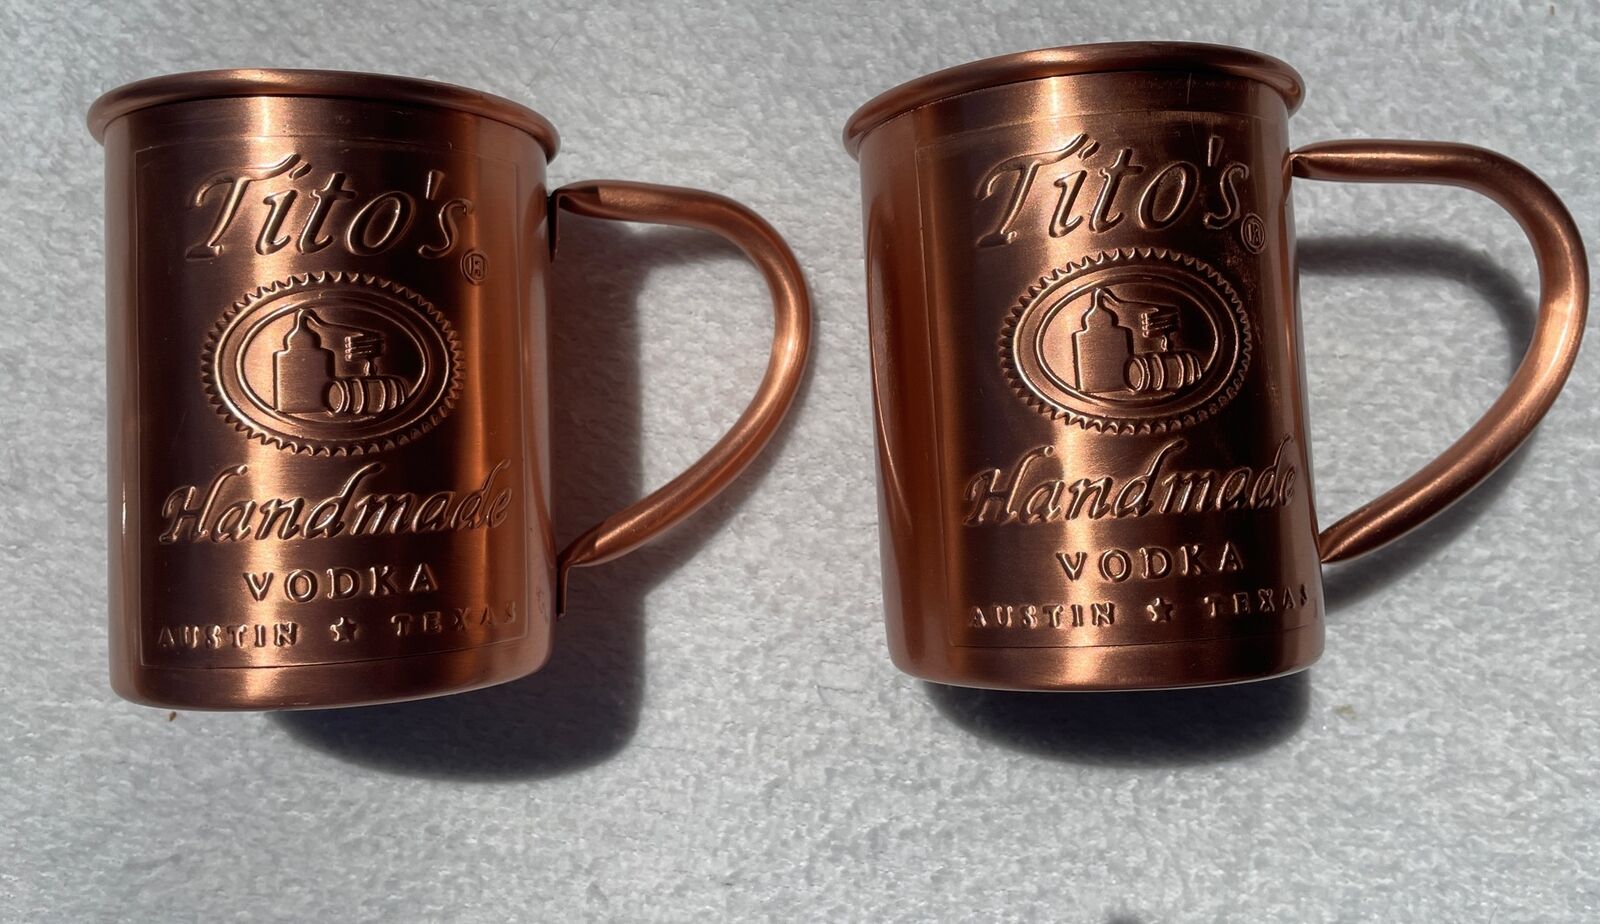 Tito’s Handmade Vodka Moscow Mule Solid Copper Mugs Collectible (Set of 2)